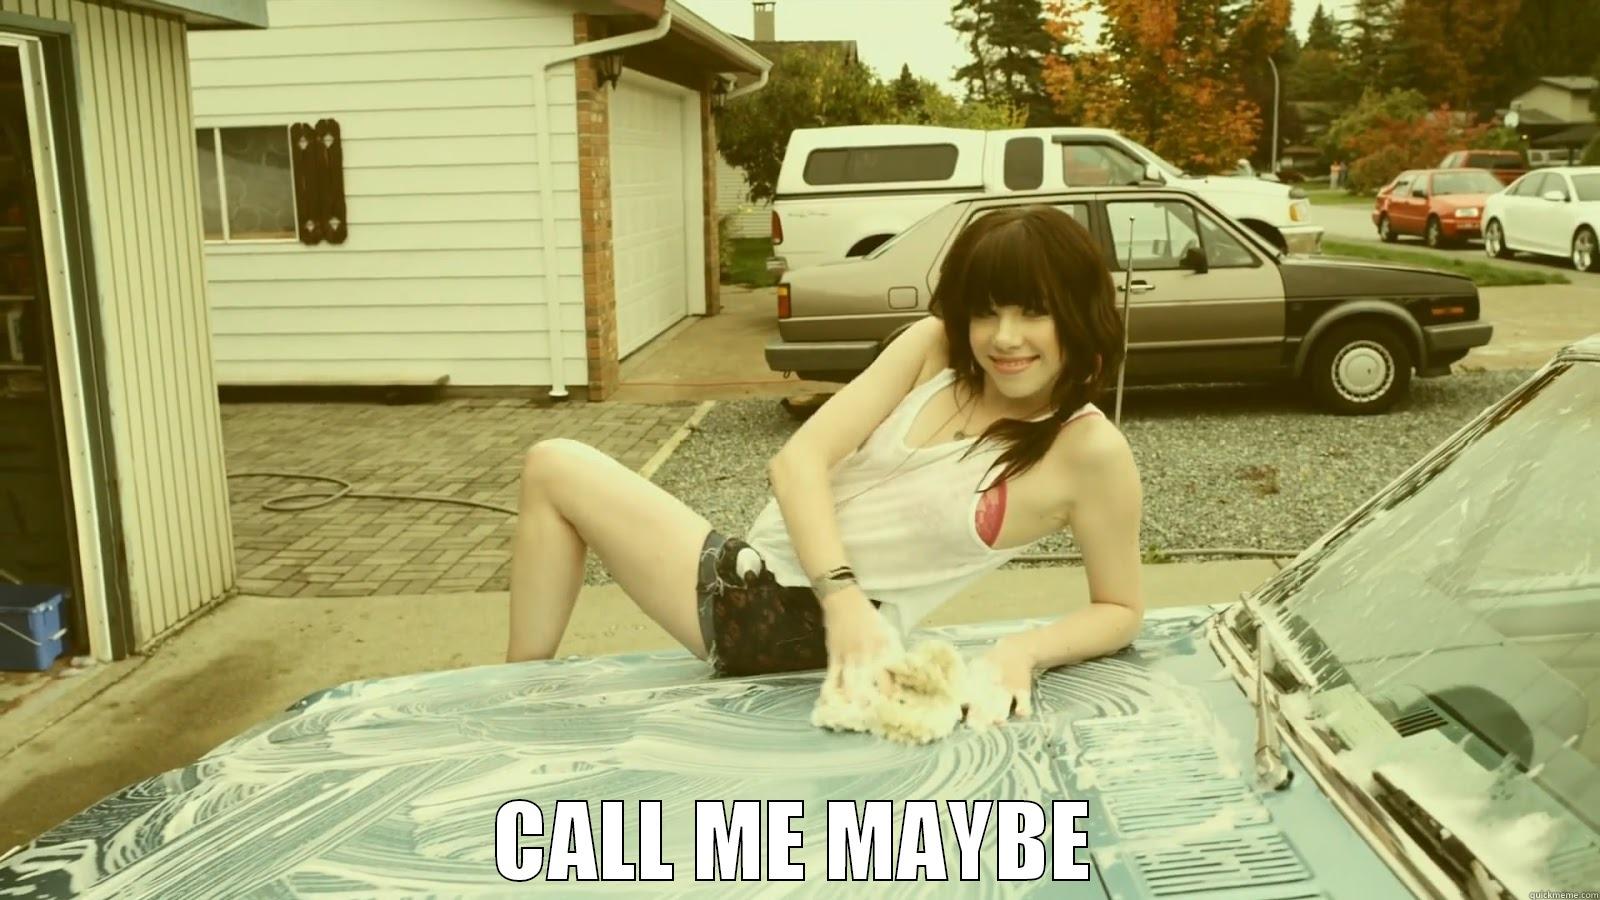  CALL ME MAYBE Misc